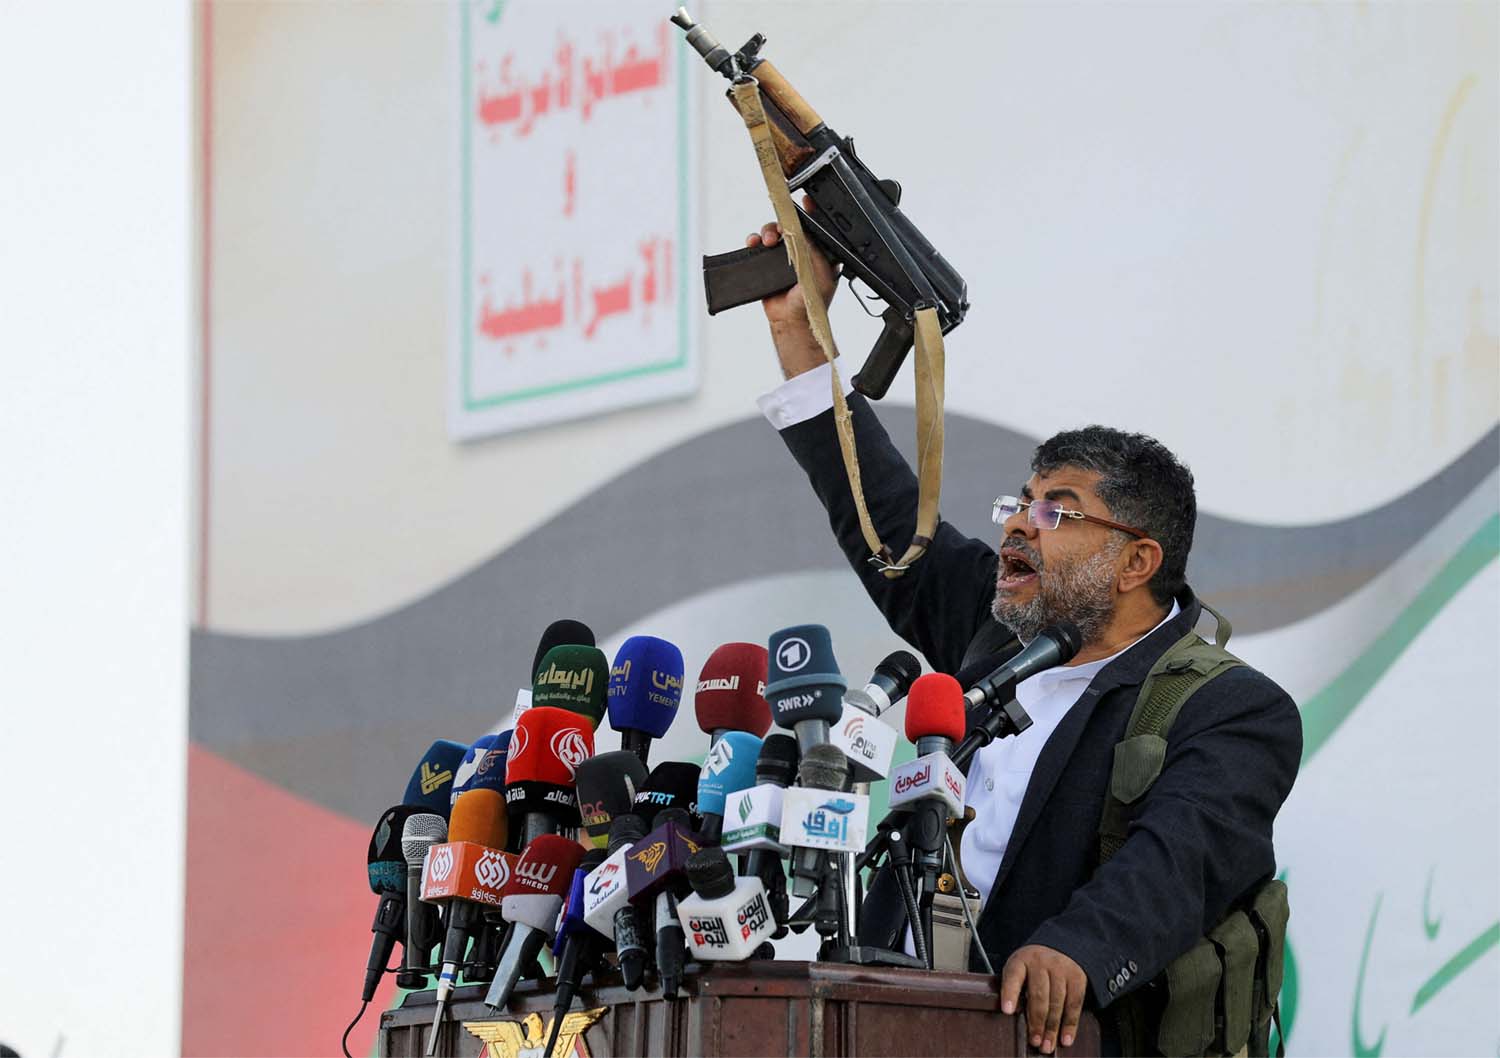 The Houthis said five fighters were killed in the initial strikes